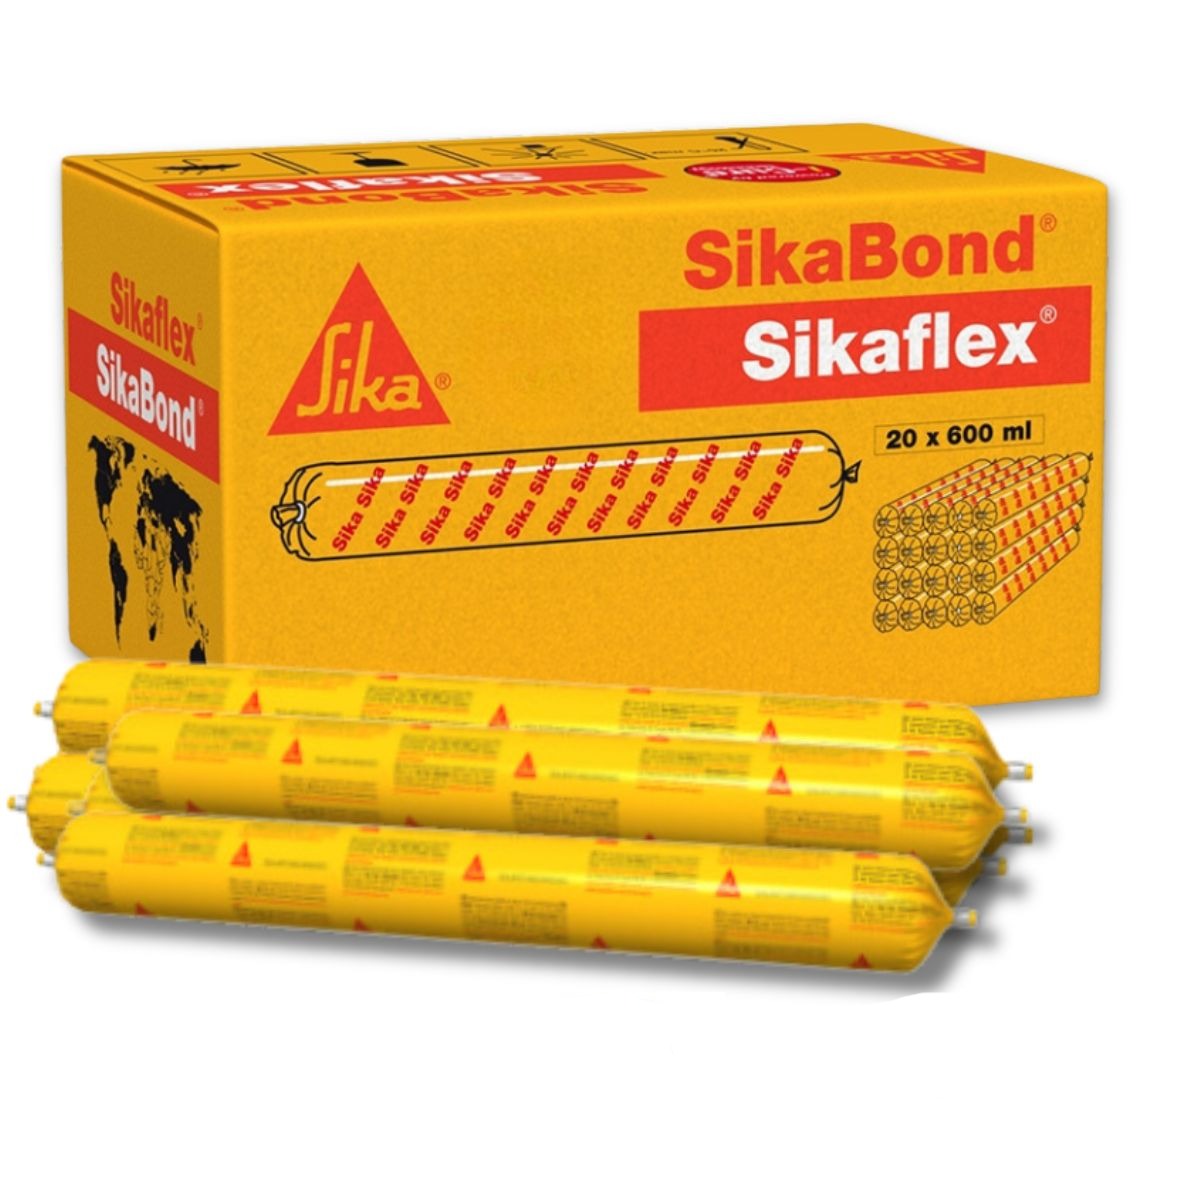 Sika 520427 600ml Sikaflex Pro Pale Brown Polyurethane Joint Sealant | 20 SAUSAGES - South East Clearance Centre